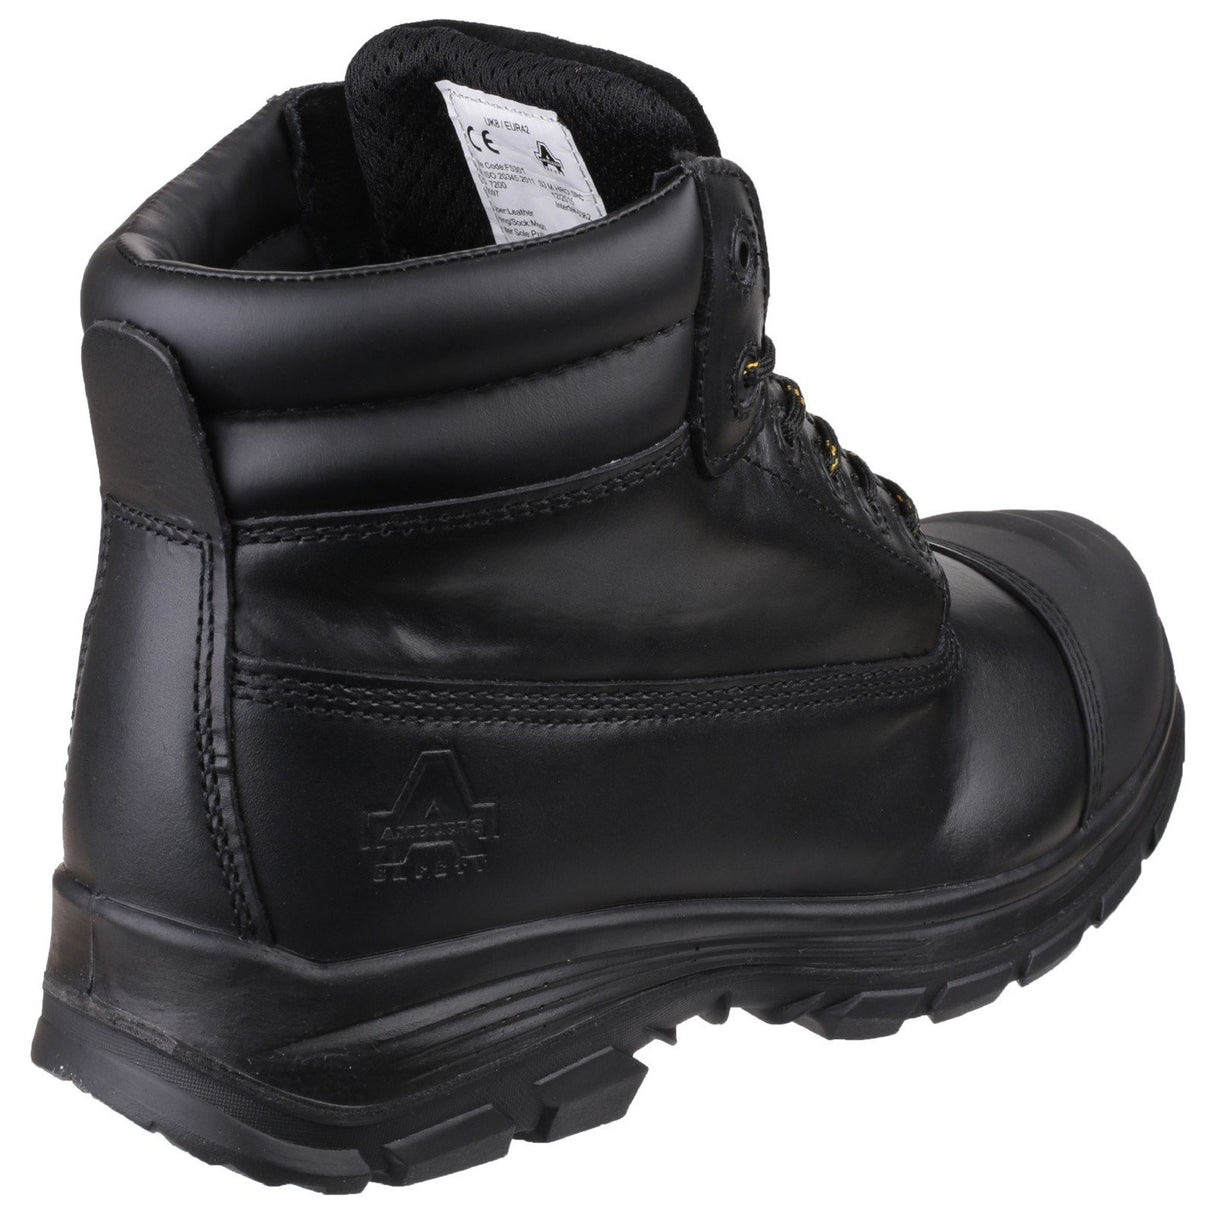 Amblers Safety Brecon Safety Boots